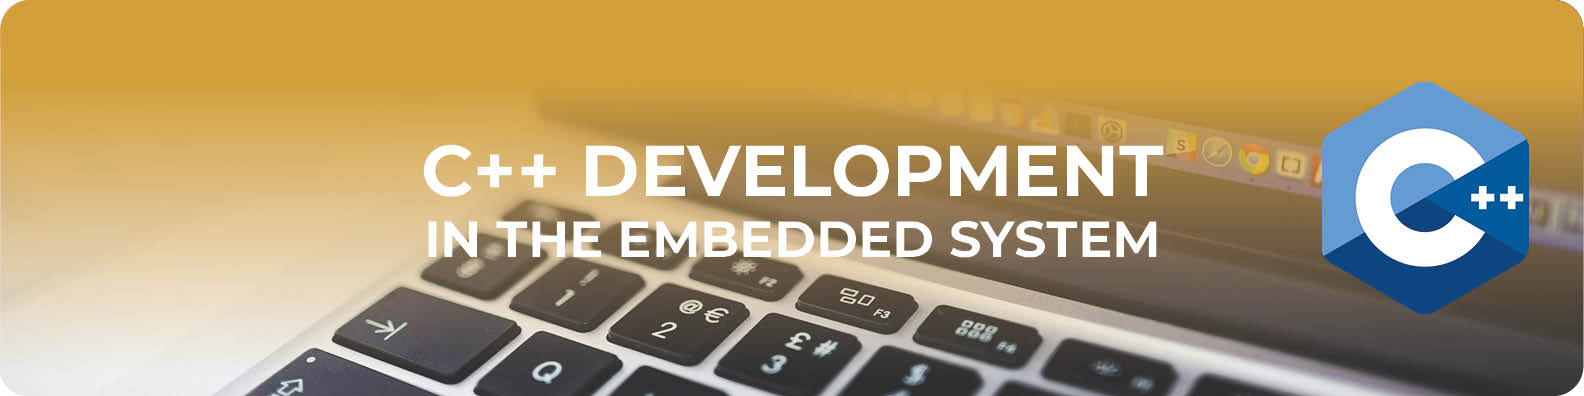 C++ DEVELOPMENT IN THE EMBEDDED SYSTEM